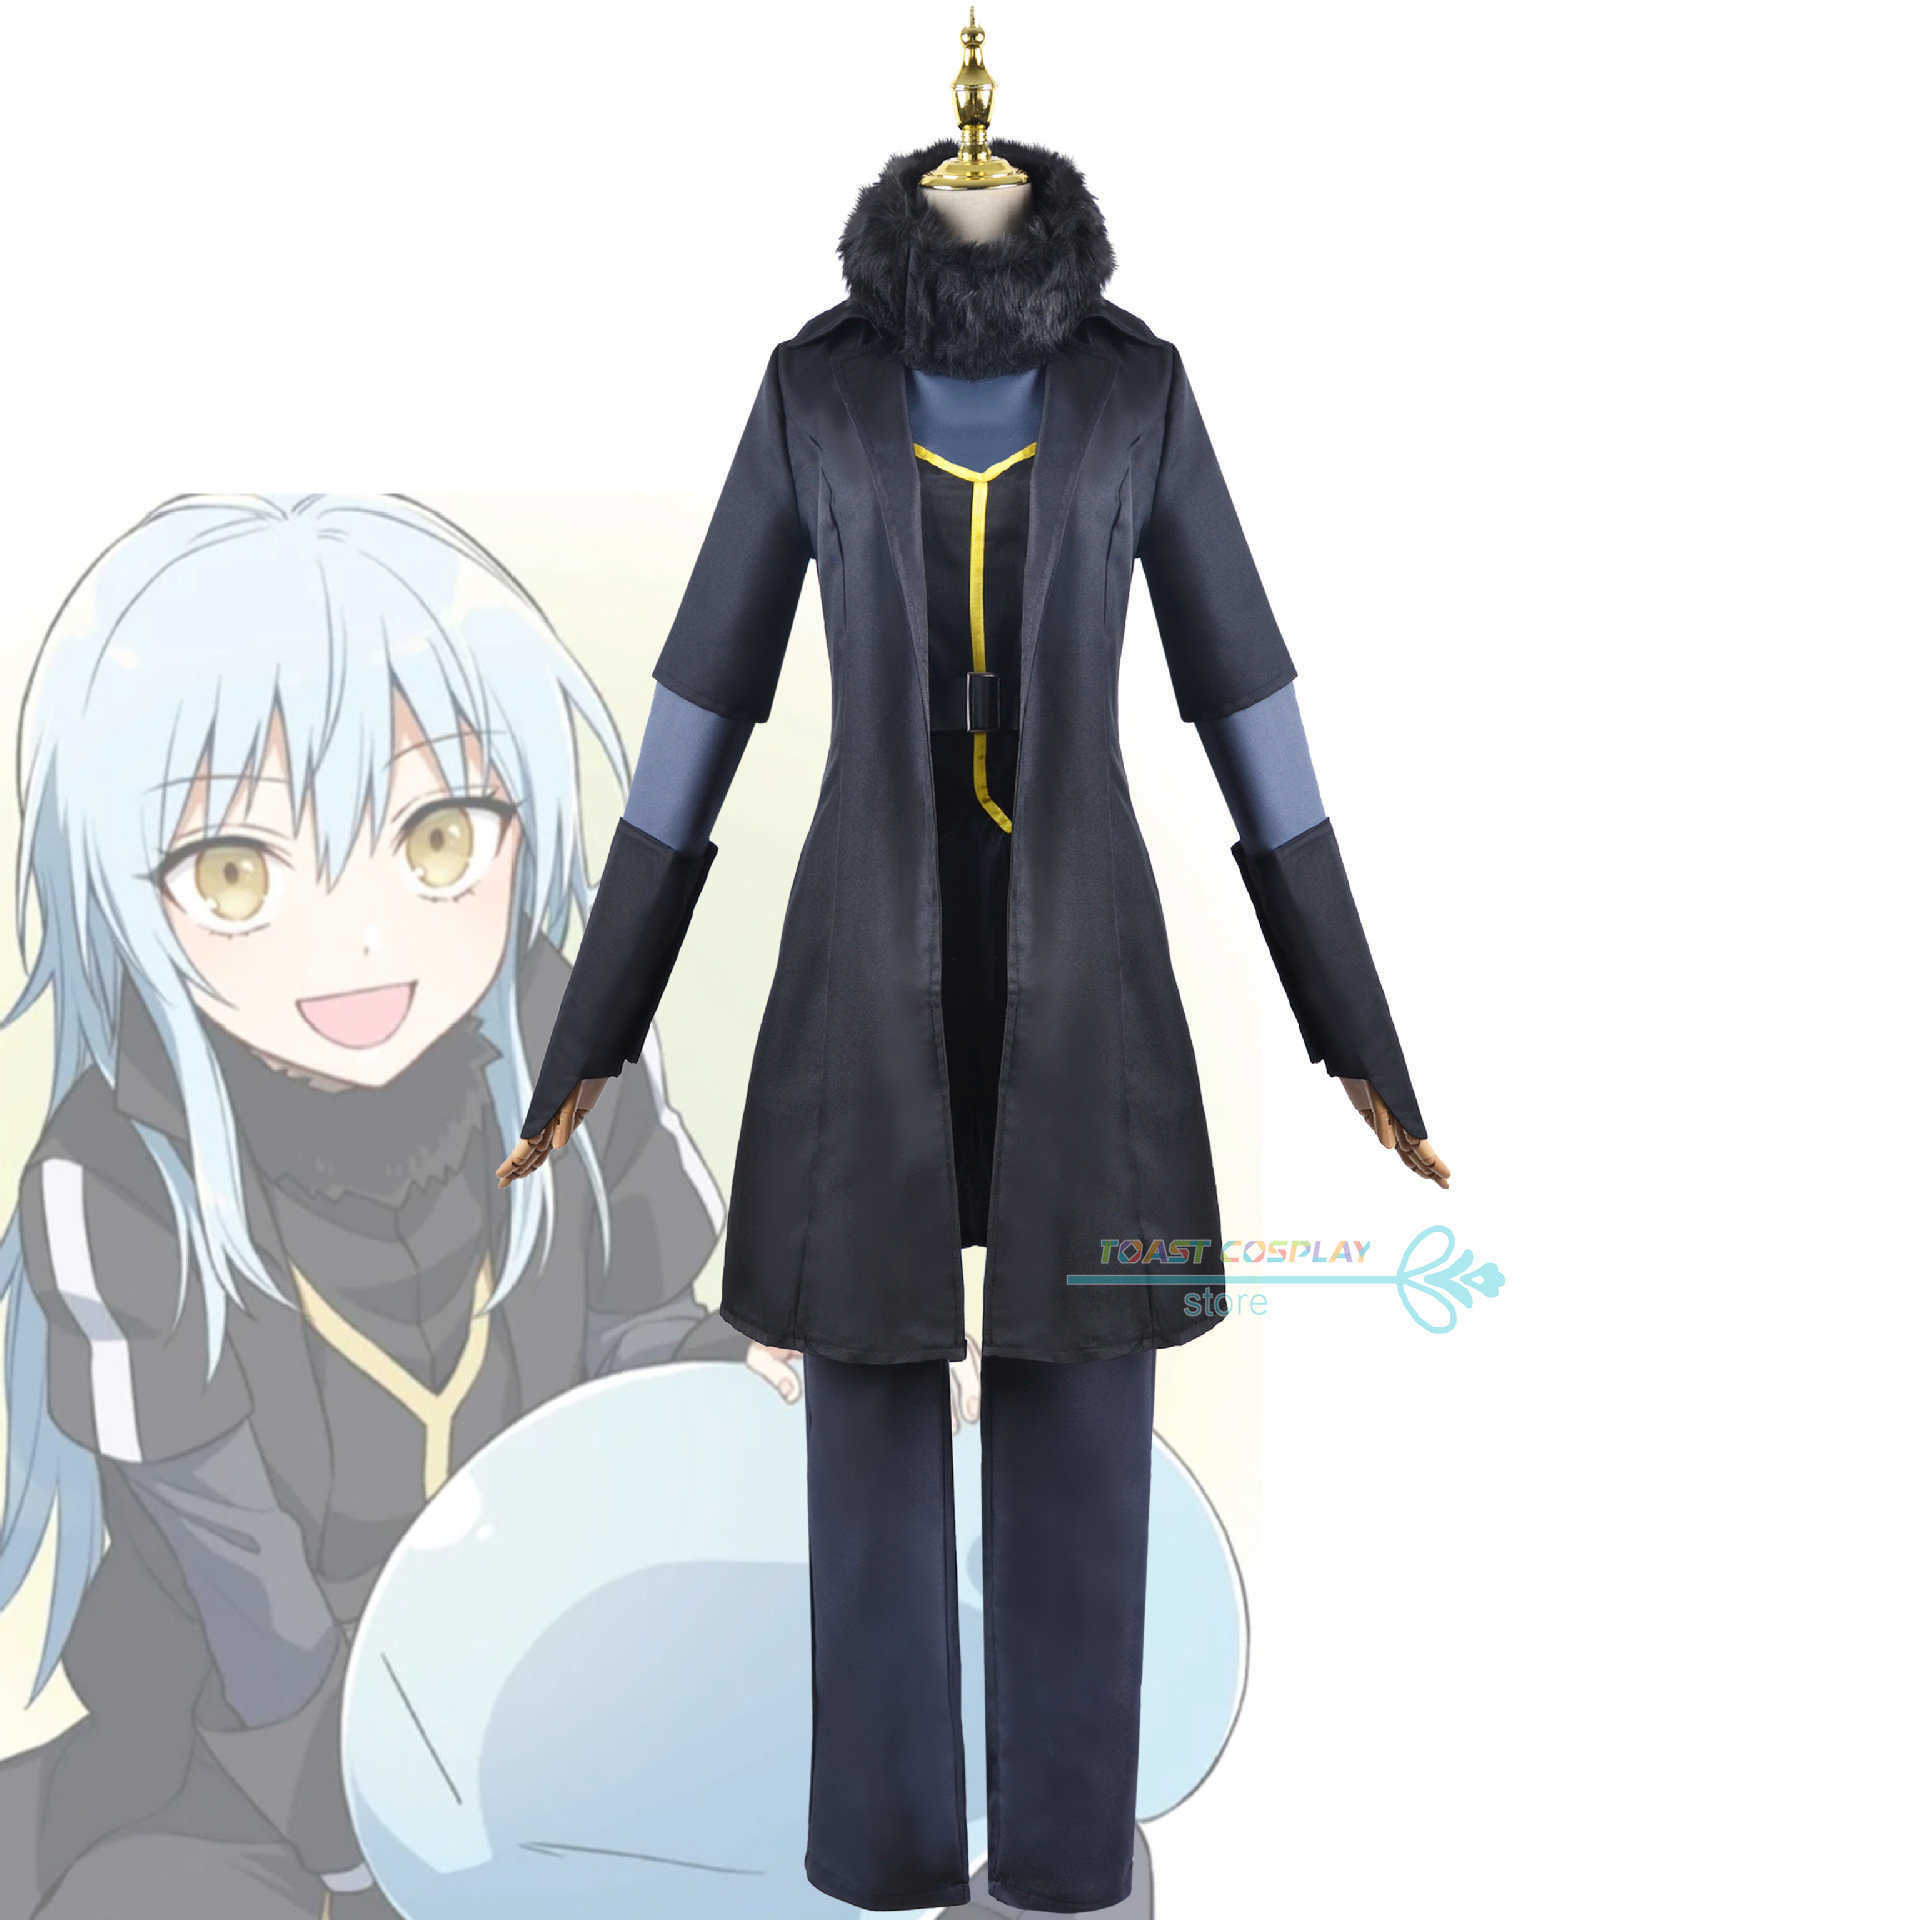 

Anime Costumes Anime Cosplay That Time I Got Reincarnated as a Slime Cos Come Outfit Rimuru Tempest Halloween Clothing for Men and Women Z0602